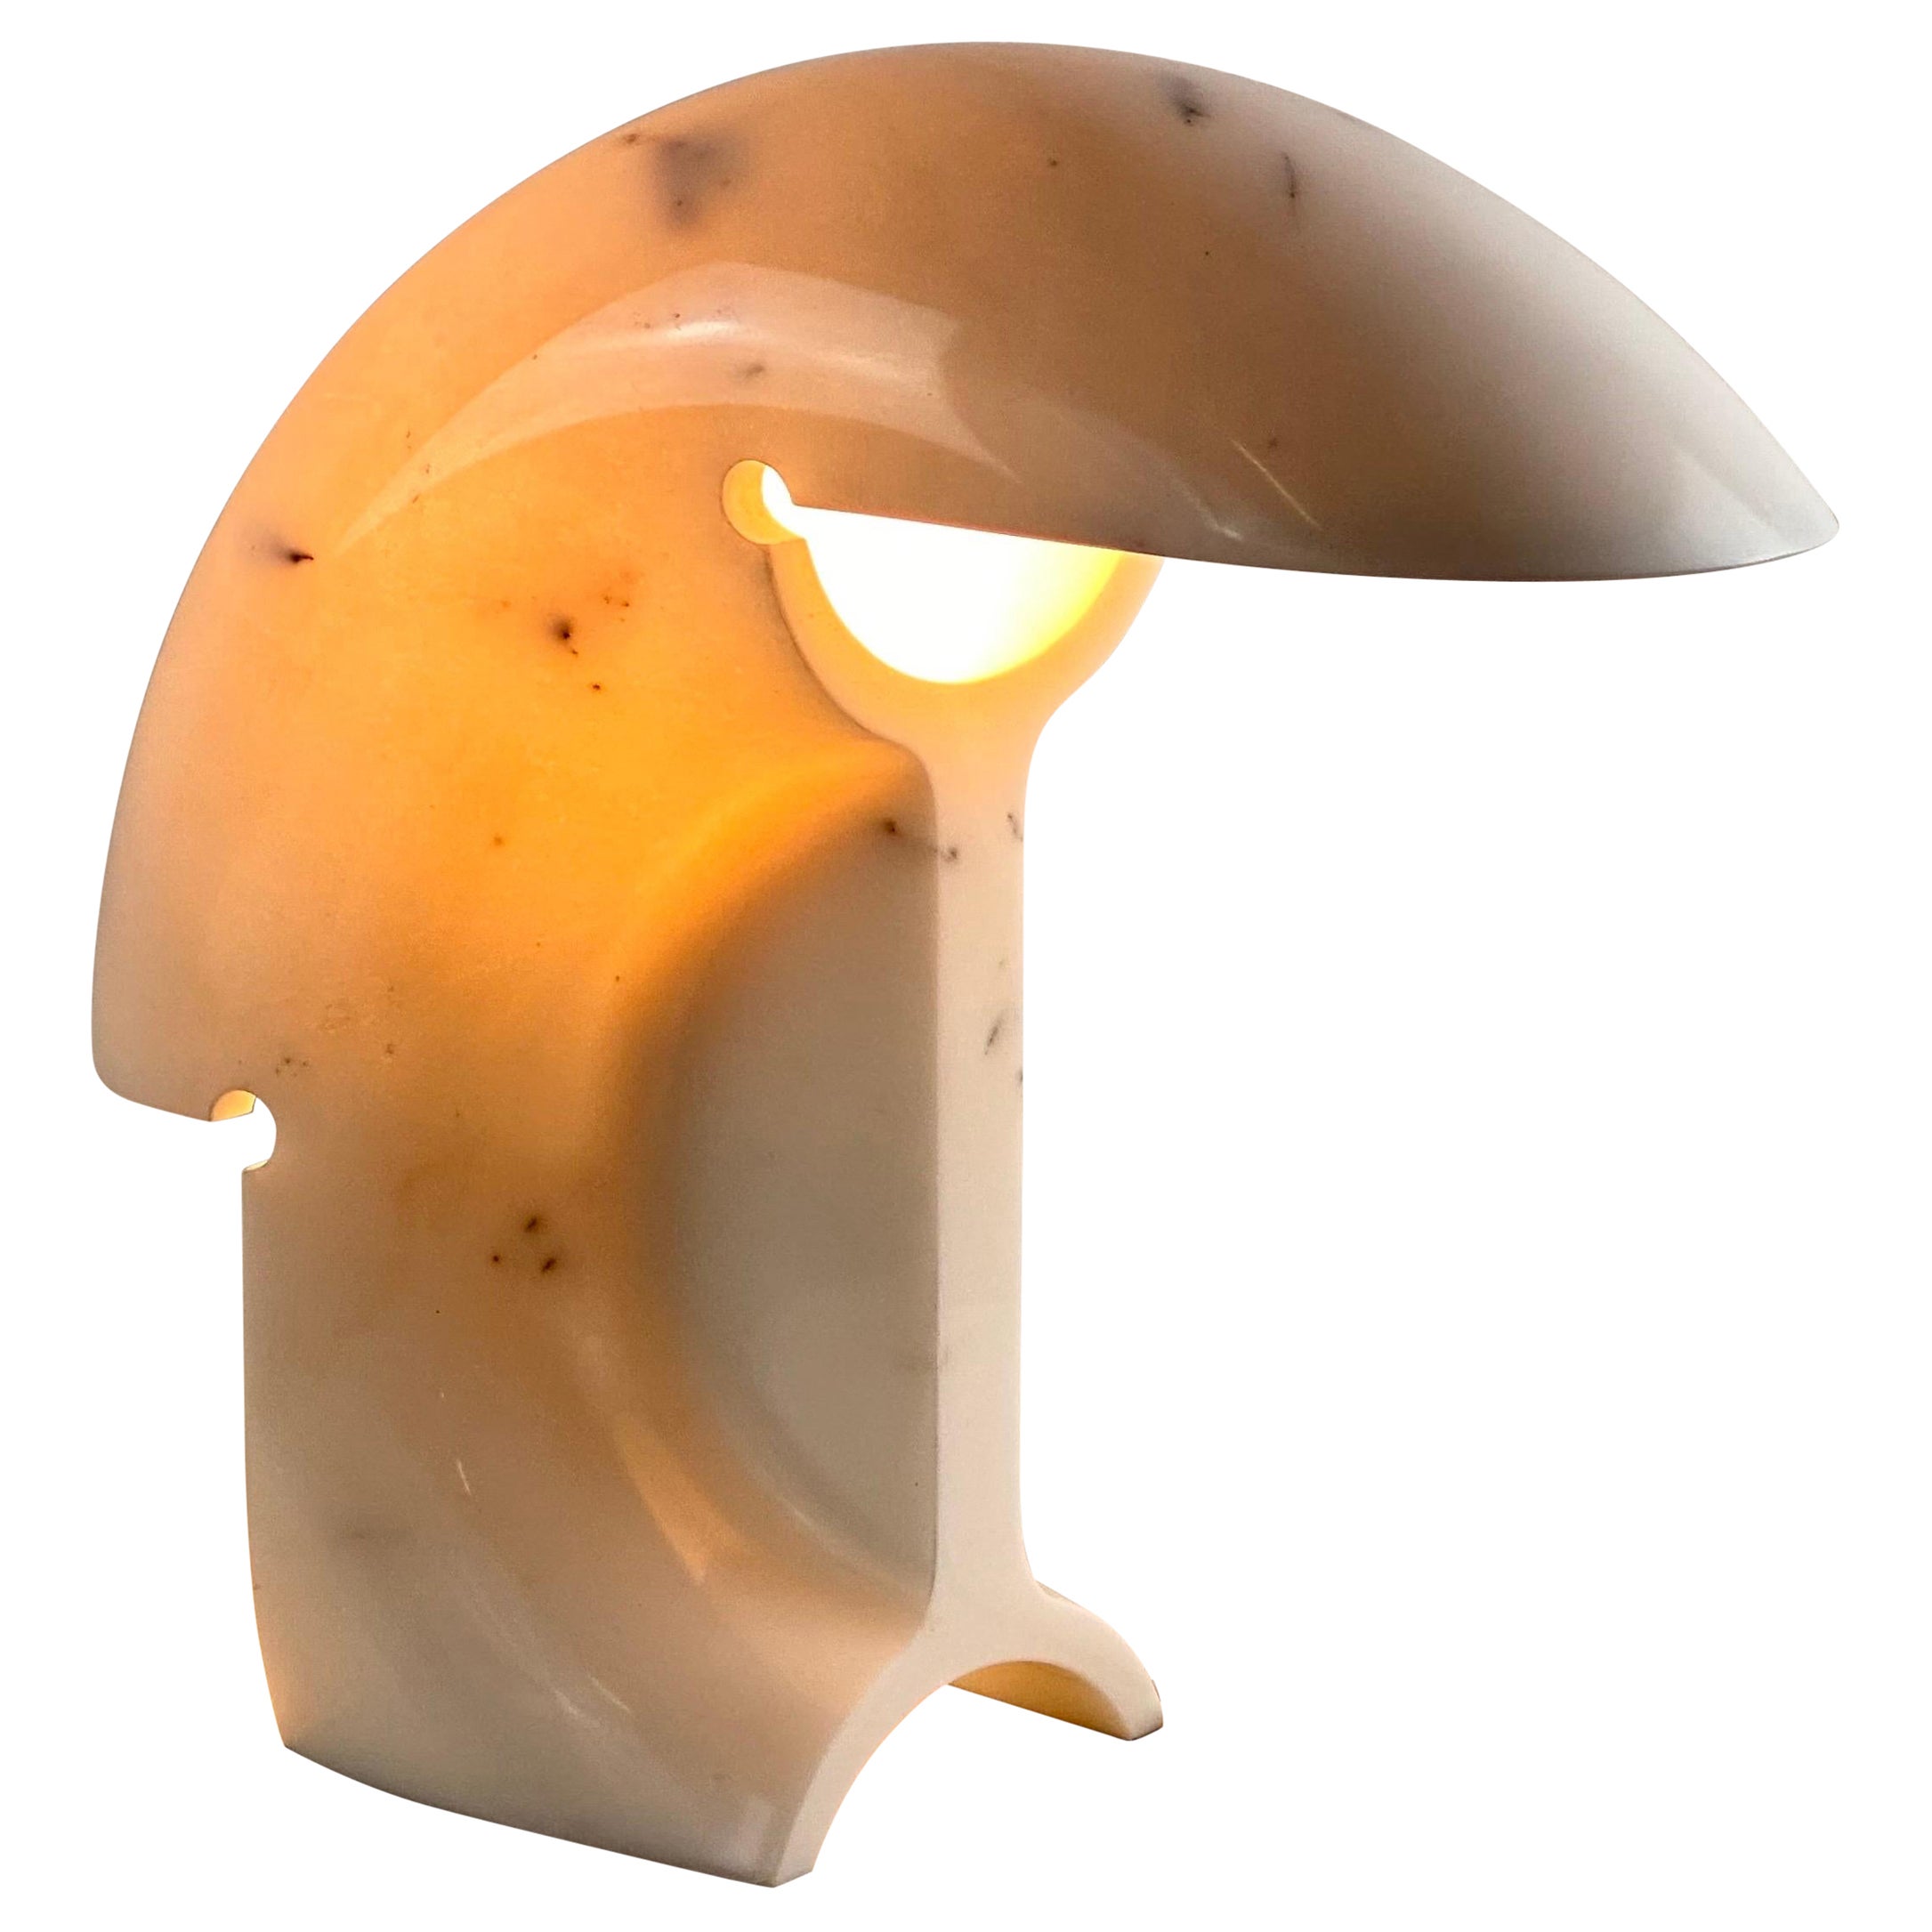  "Biagio" Table Lamp by Tobia Scarpa for Flos in White Carrara Marble, 1960s